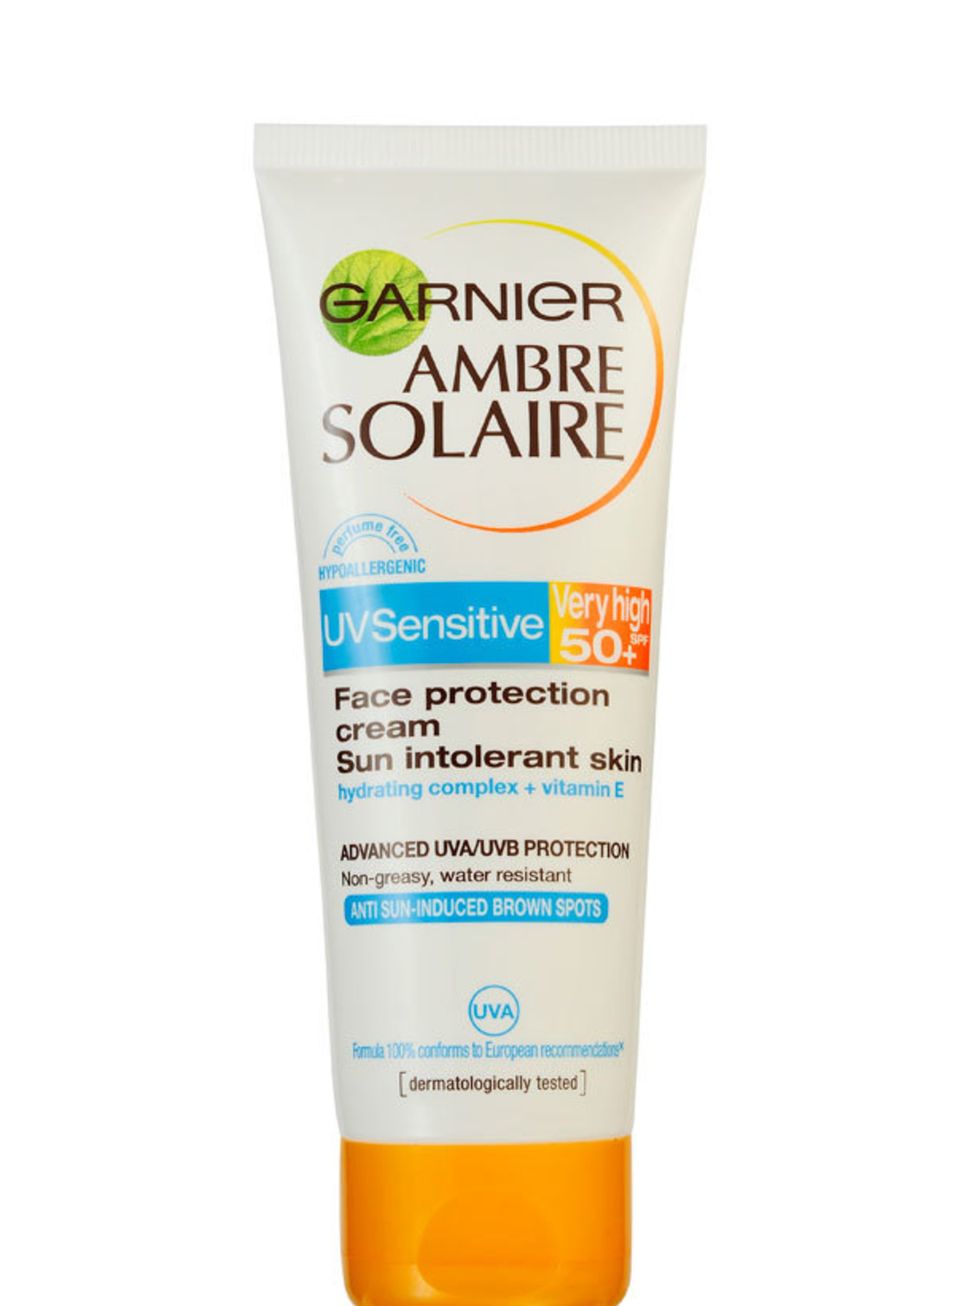 <p><strong>Best Sunscreen</strong></p><p>Garnier Ambre Solaire UV Sensitive Very High SPF 50+ Face Protection Cream, £12.25 at <a href="http://www.feelunique.com/p/Garnier-Ambre-Solaire-UV-Sensitive-Face-Protection-Cream-Very-High-SPF50-75ml">Feel Unique<